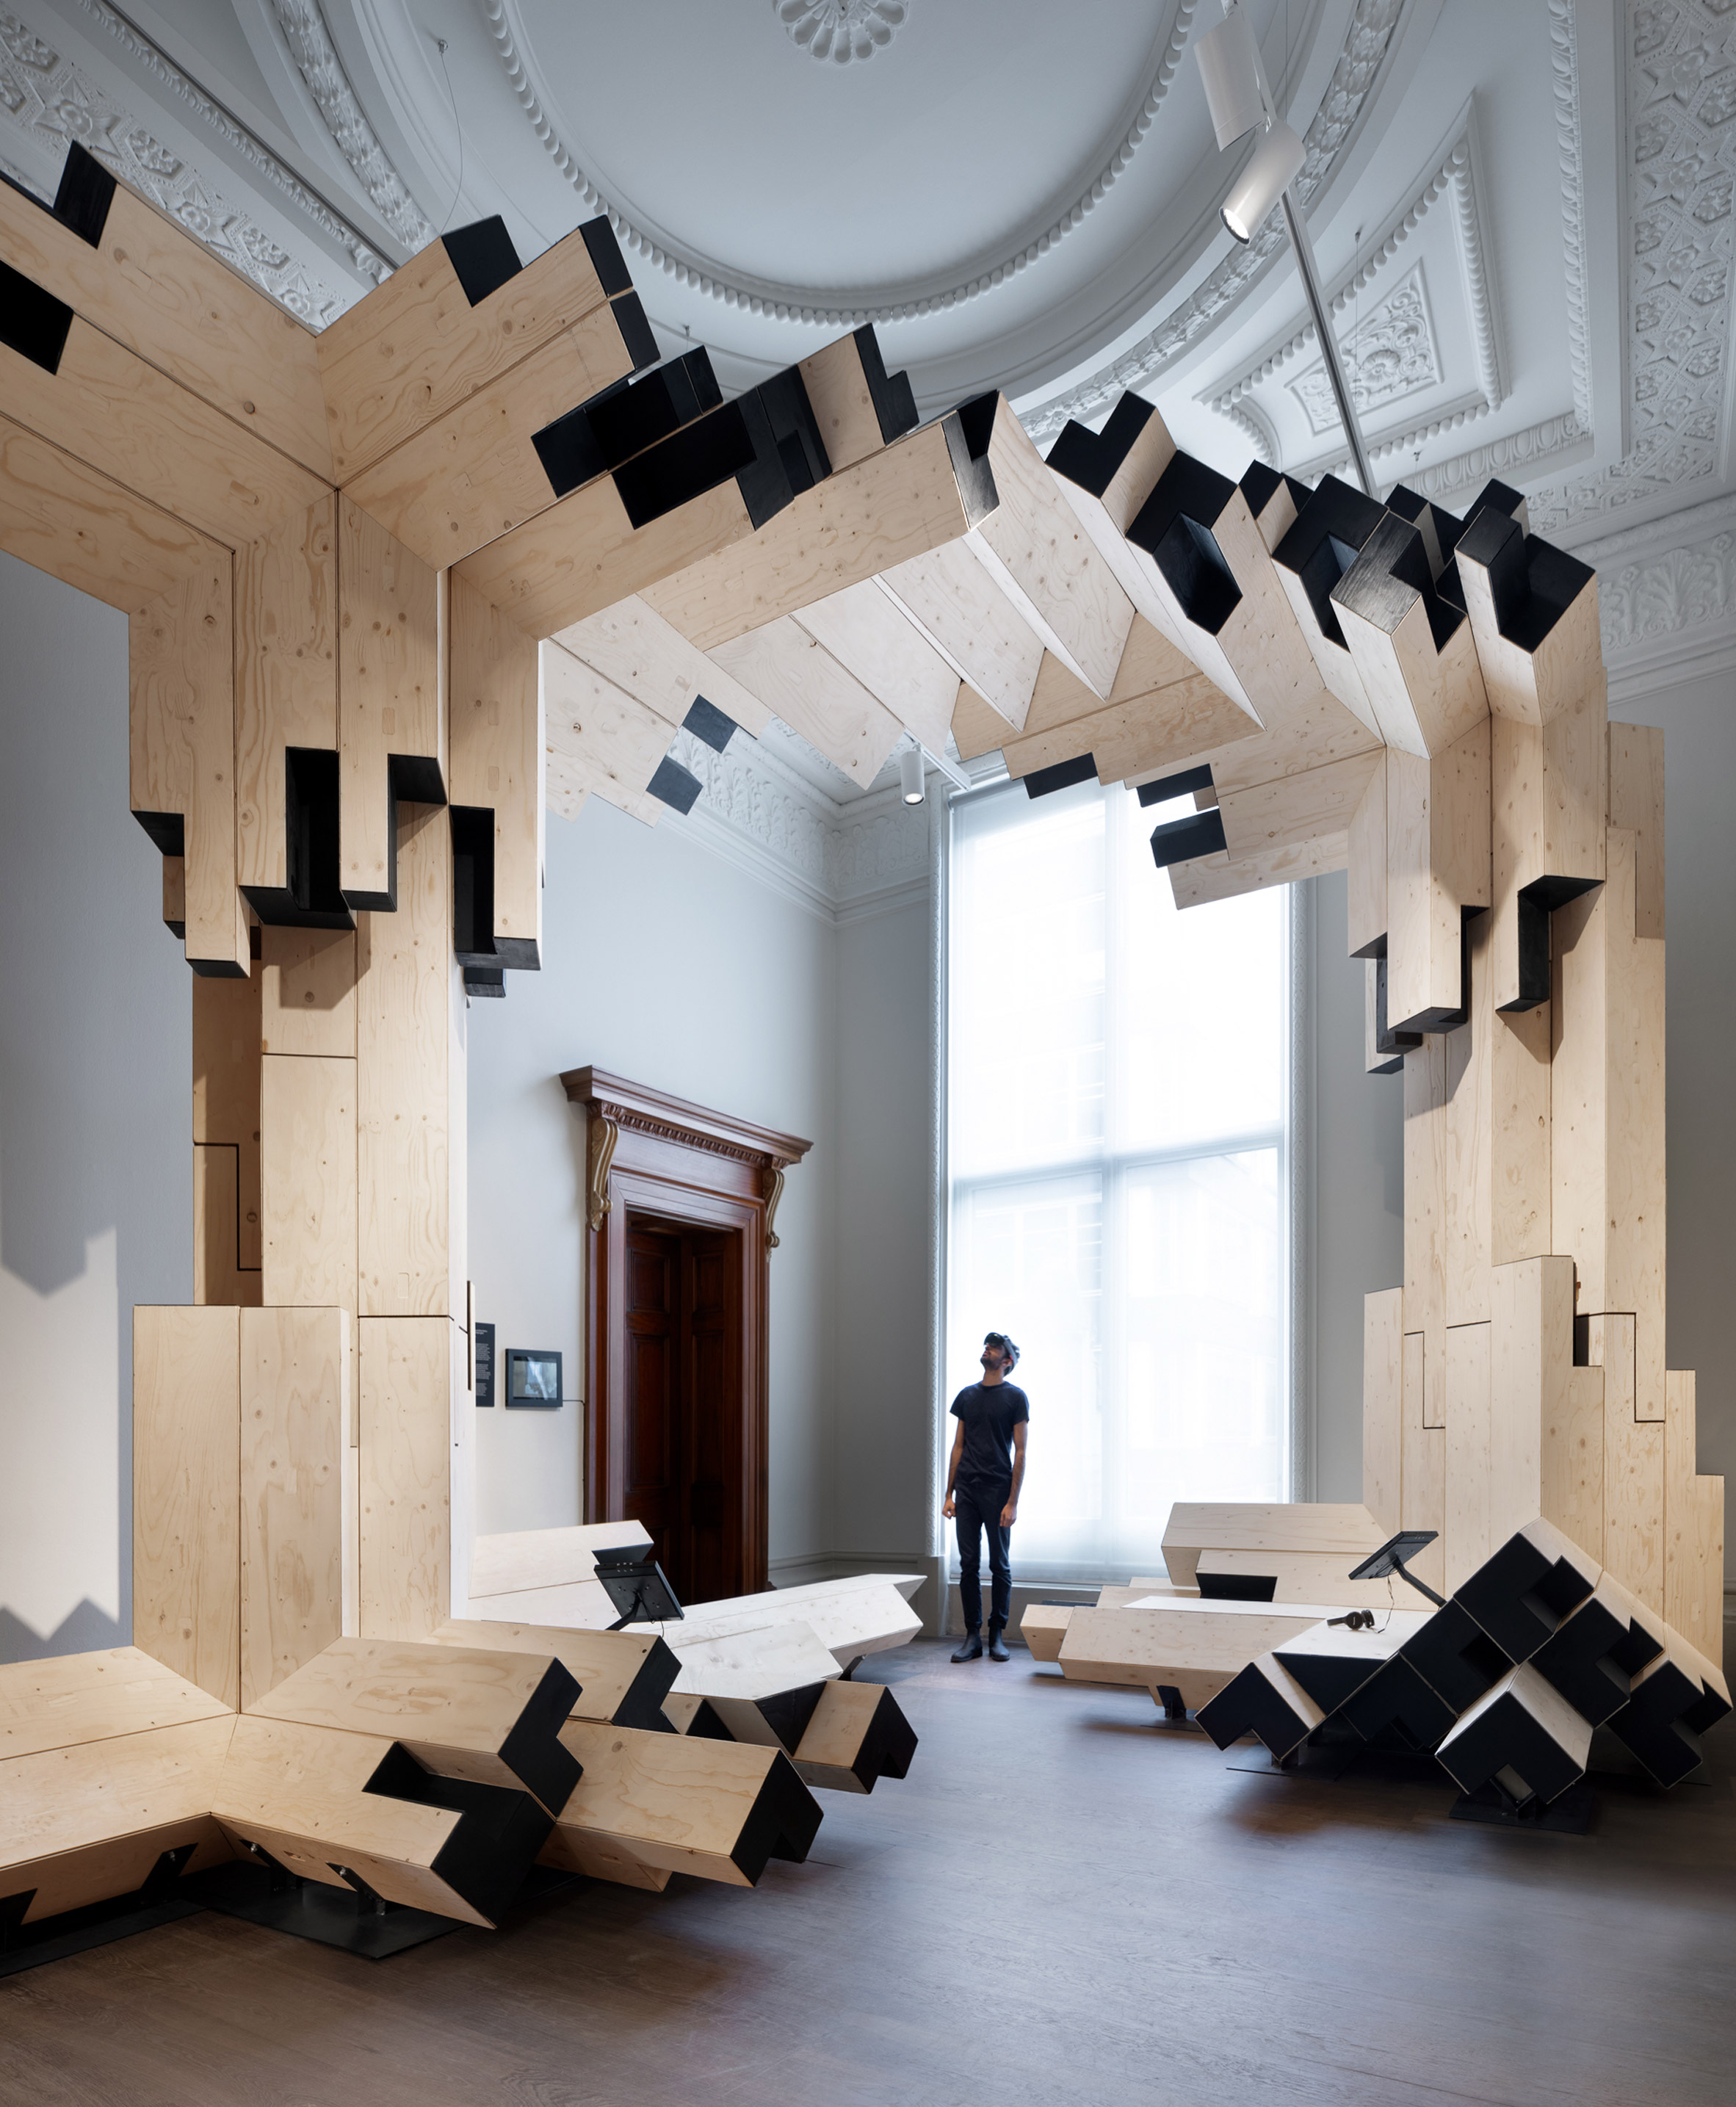 Invisible Landscapes virtual reality installations at the Royal Academy of Arts